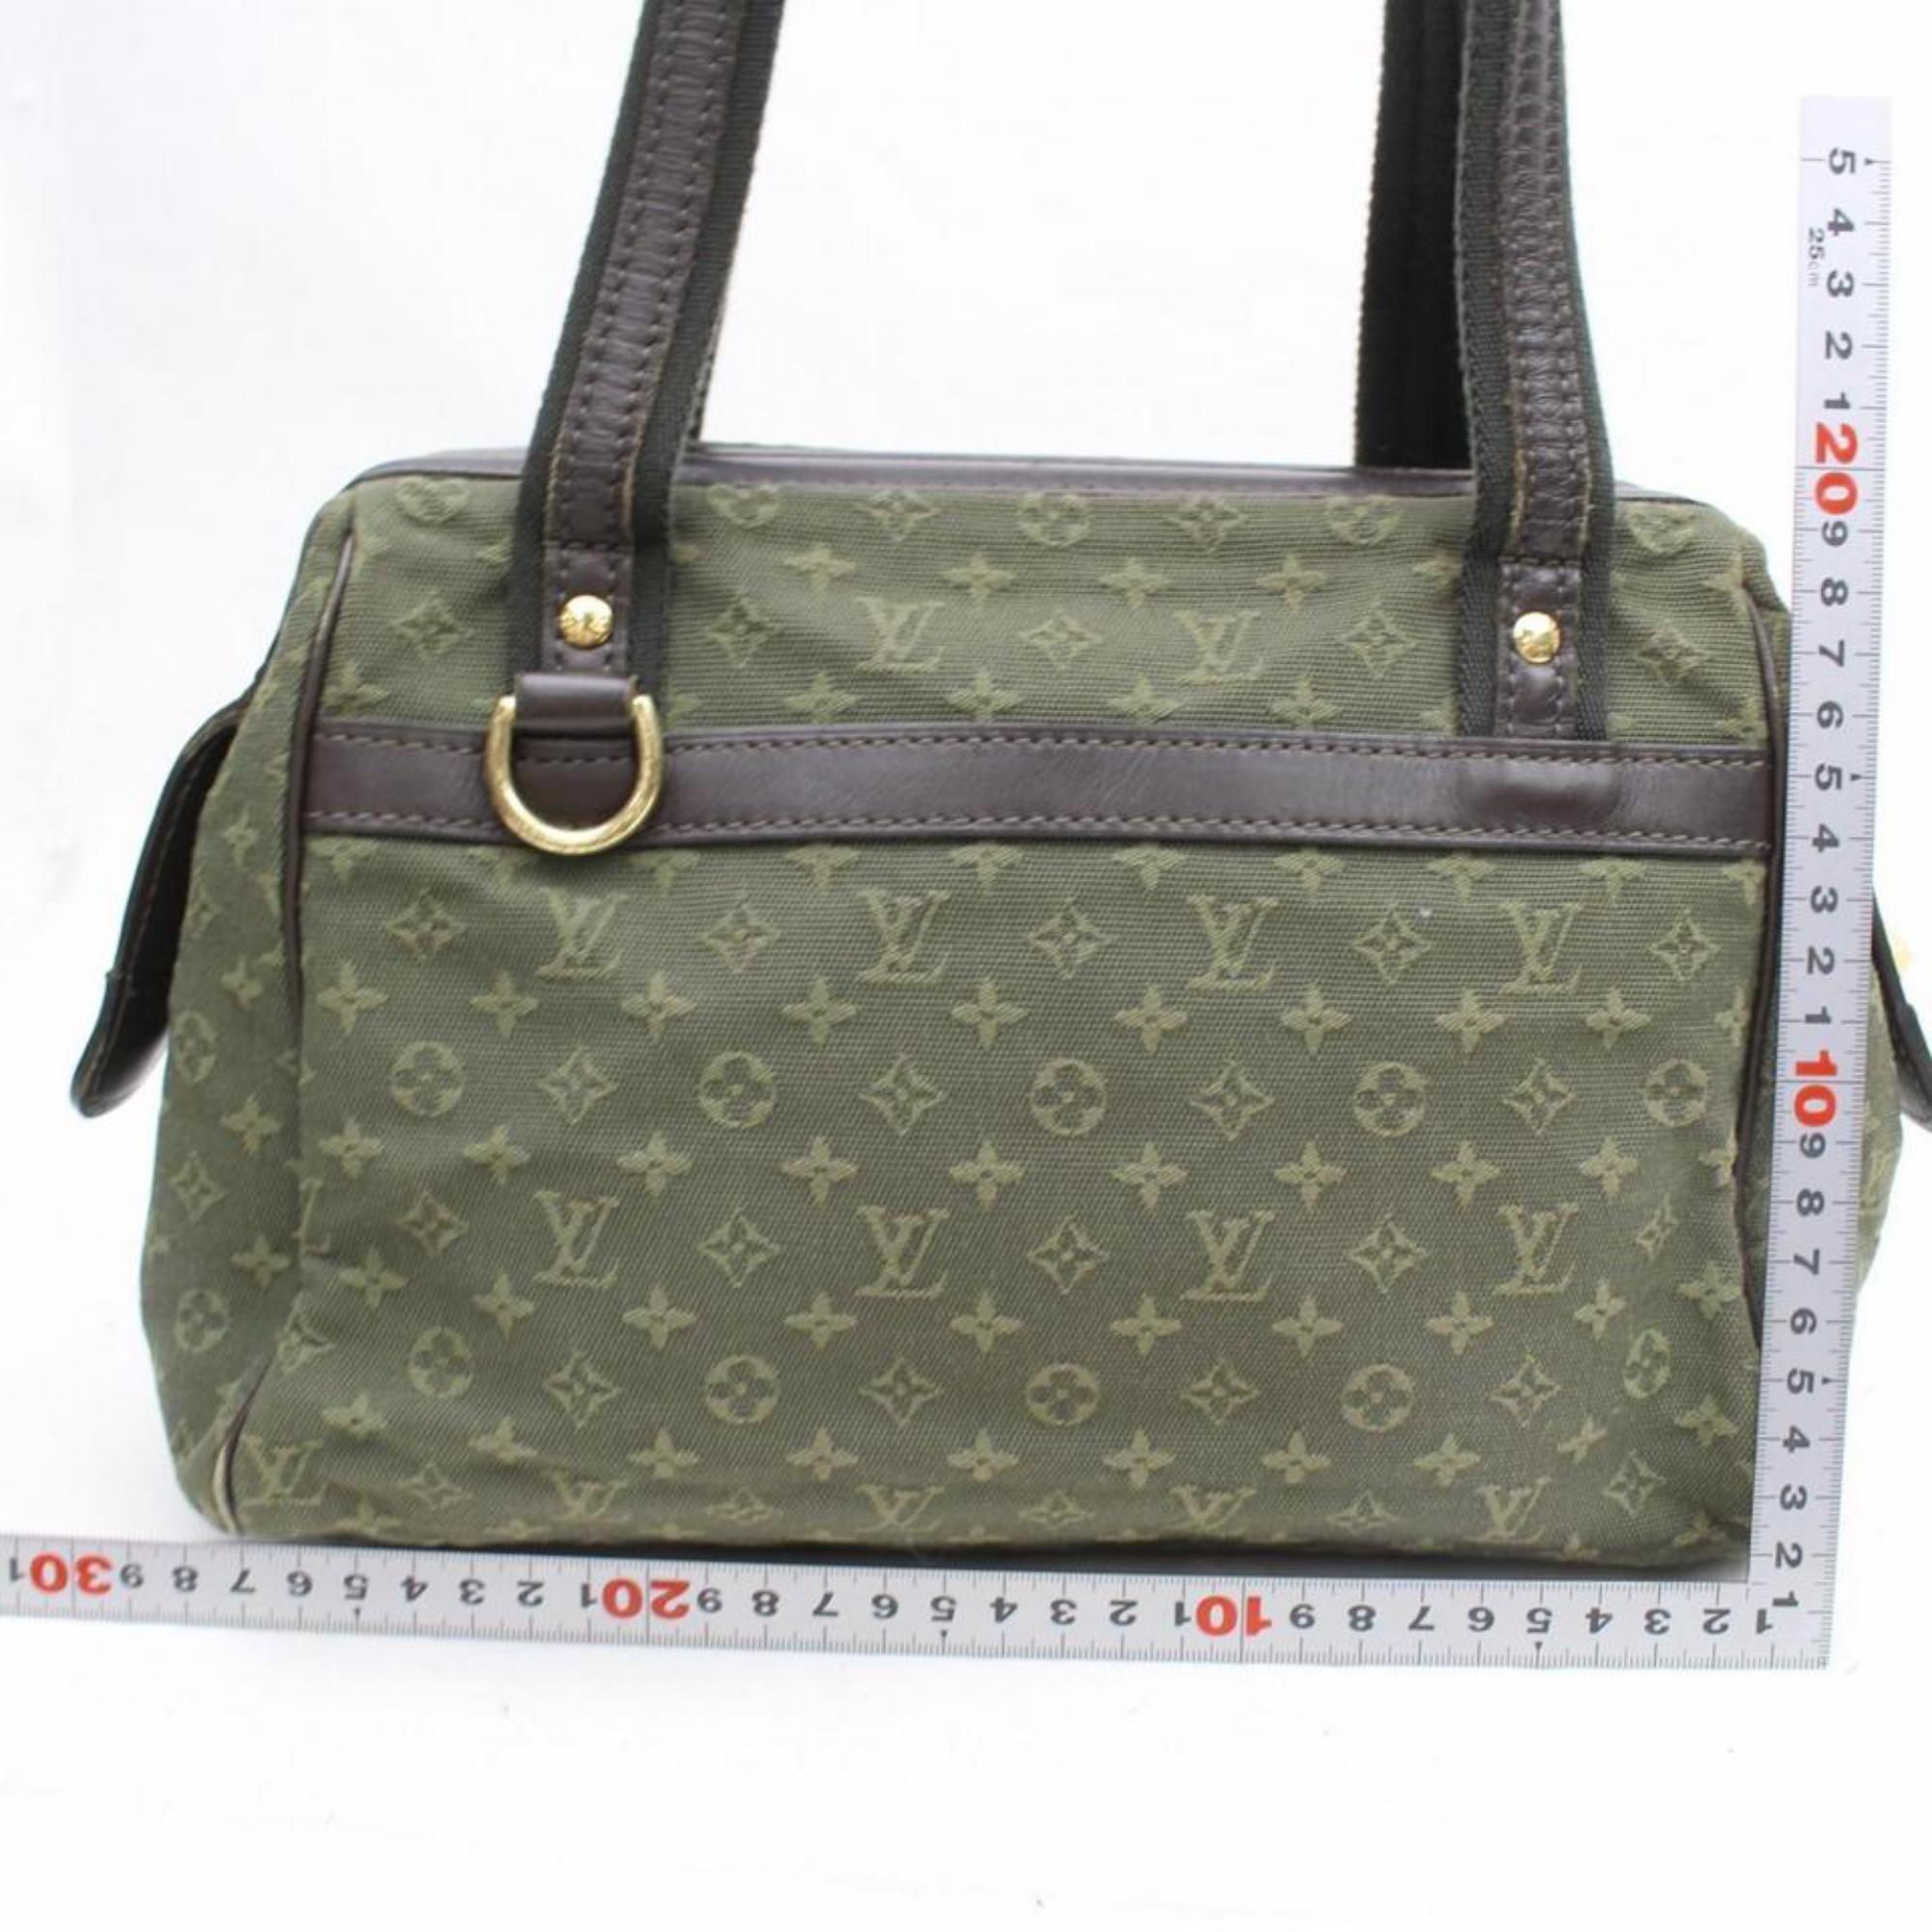 Louis Vuitton Josephine Khaki Mini Lin Boston Pm 869727 Green Canvas Satchel In Good Condition For Sale In Forest Hills, NY